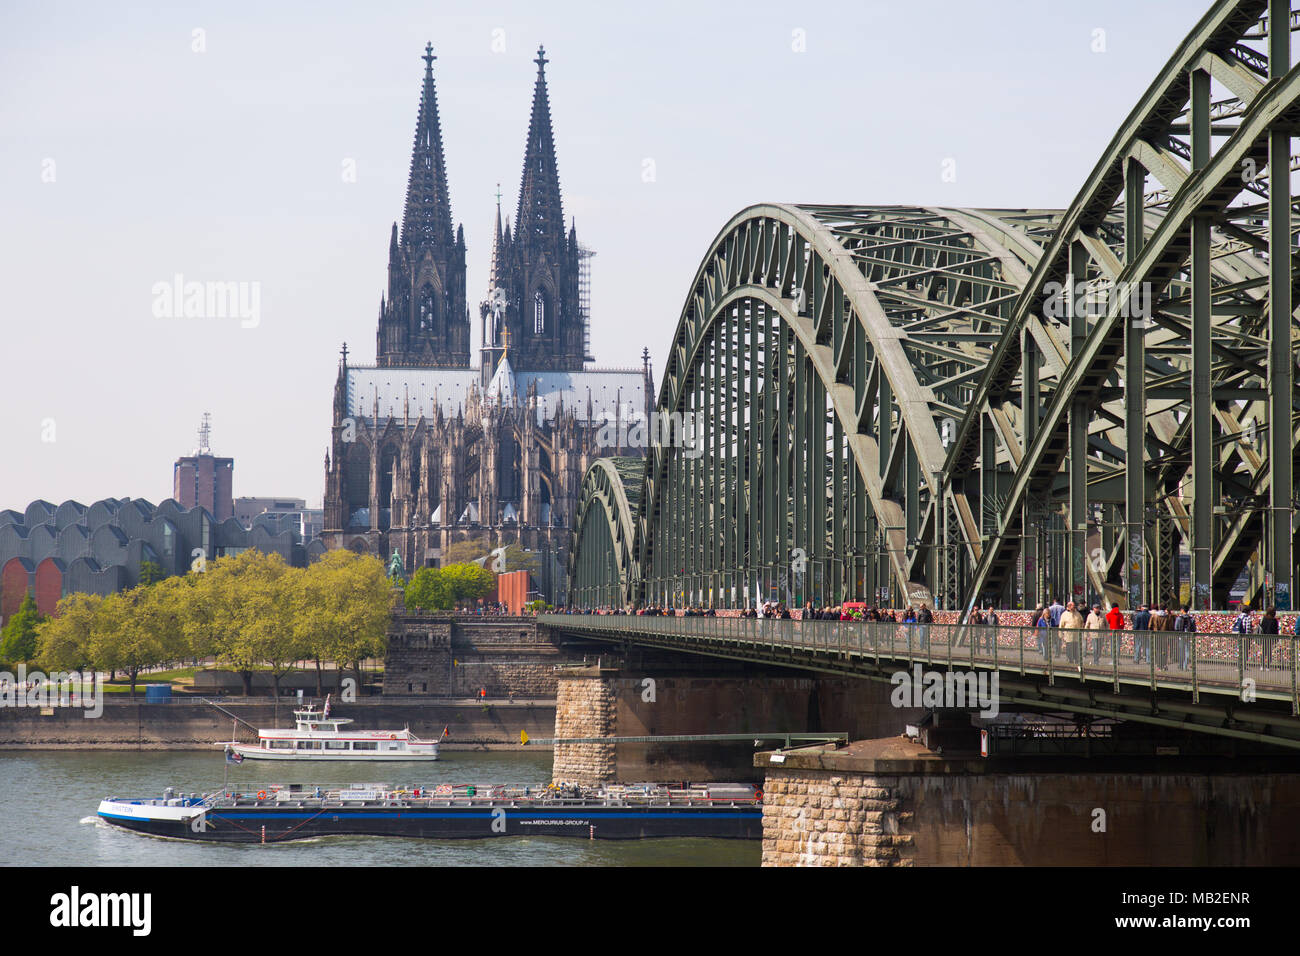 Cologne Cathedral, a popular tourist destination in Germany Stock Photo